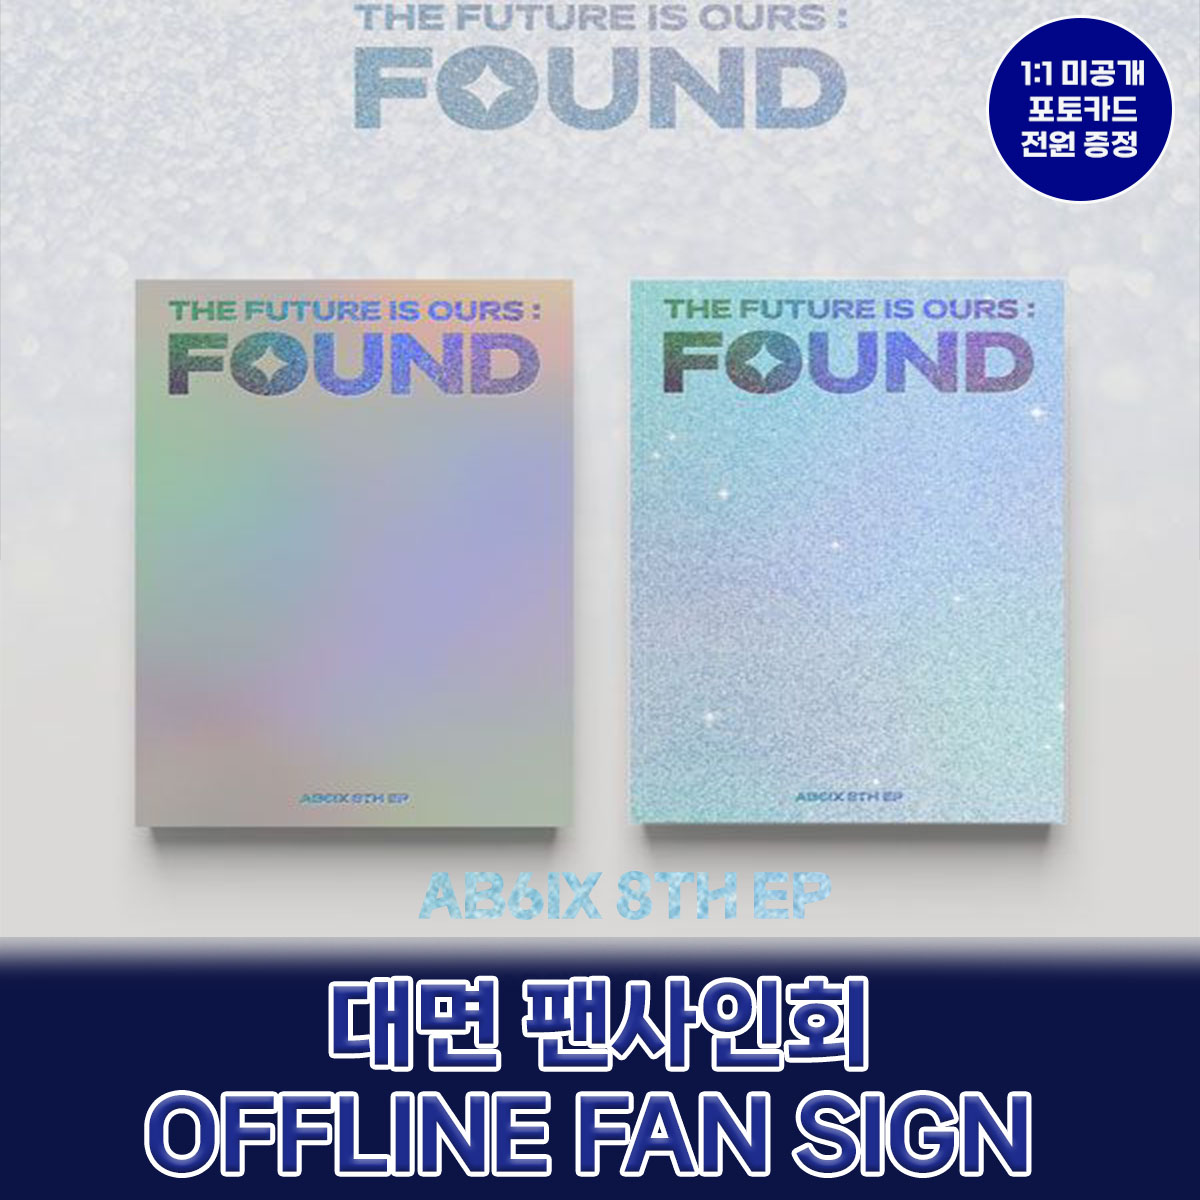 [0505] AB6IX 8TH EP Album [THE FUTURE IS OURS : FOUND]’ Off-Line Sign Event